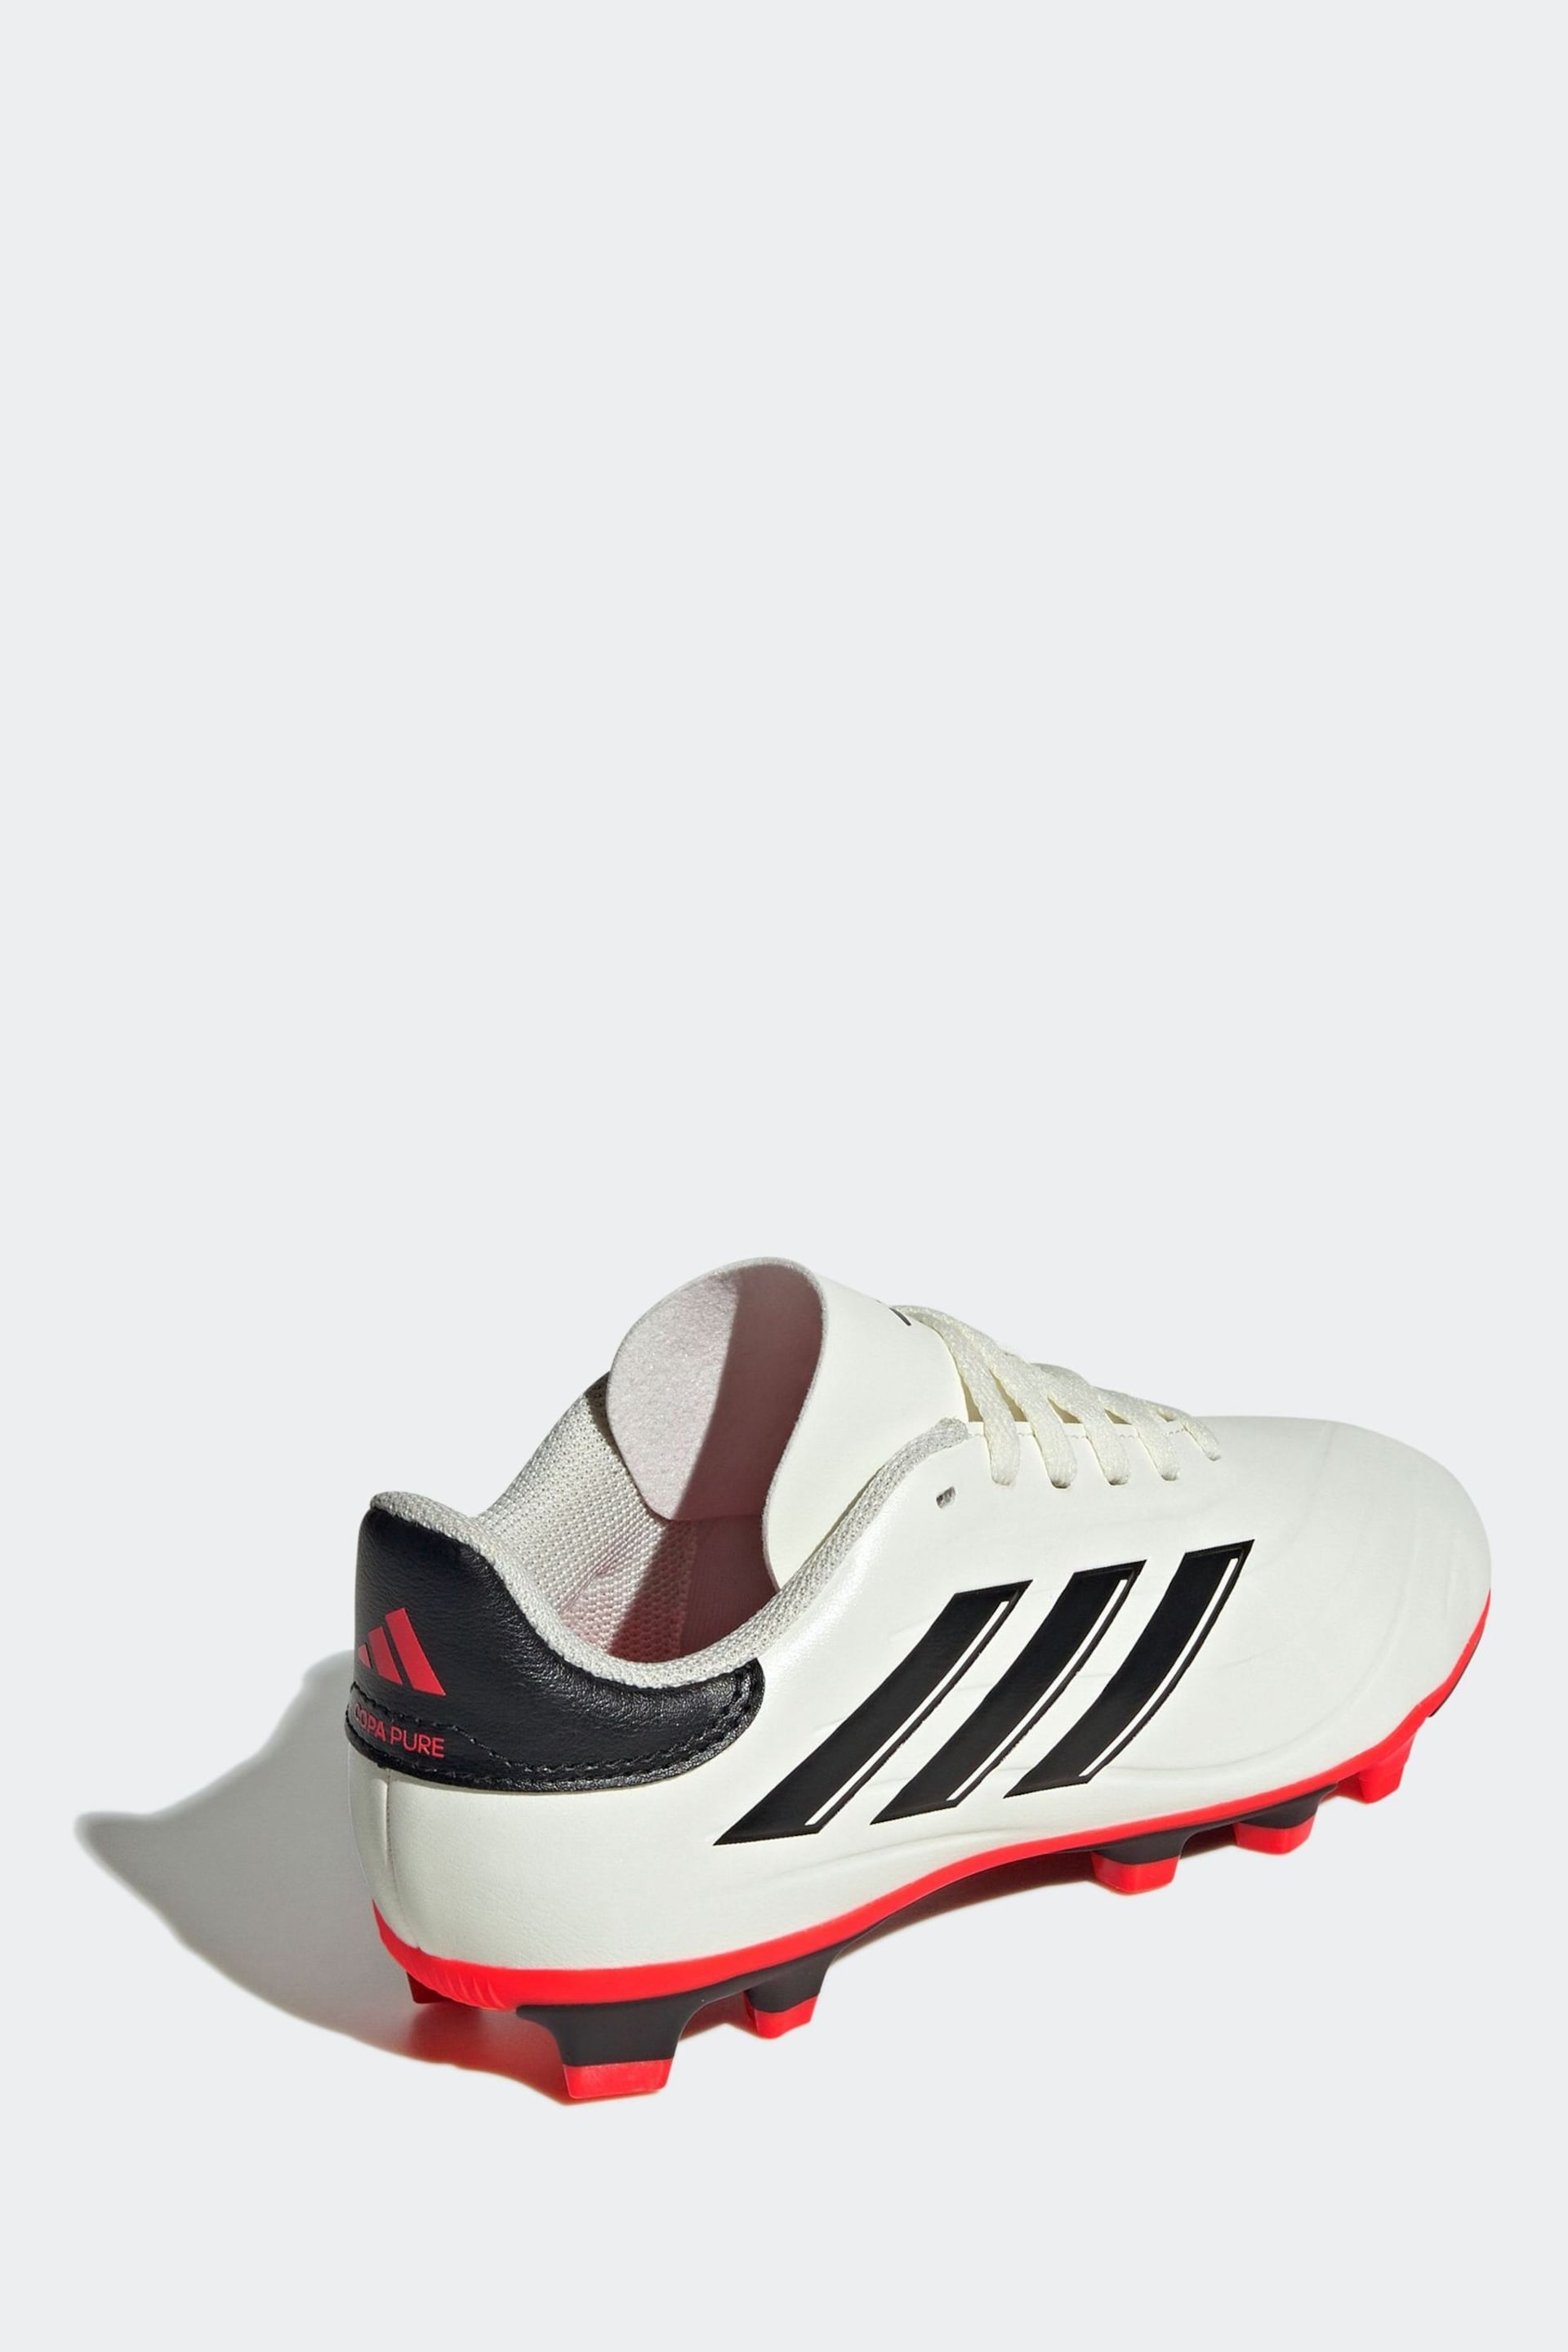 adidas White Football Copa Pure II Club Flexible Ground Kids Boots - Image 4 of 10